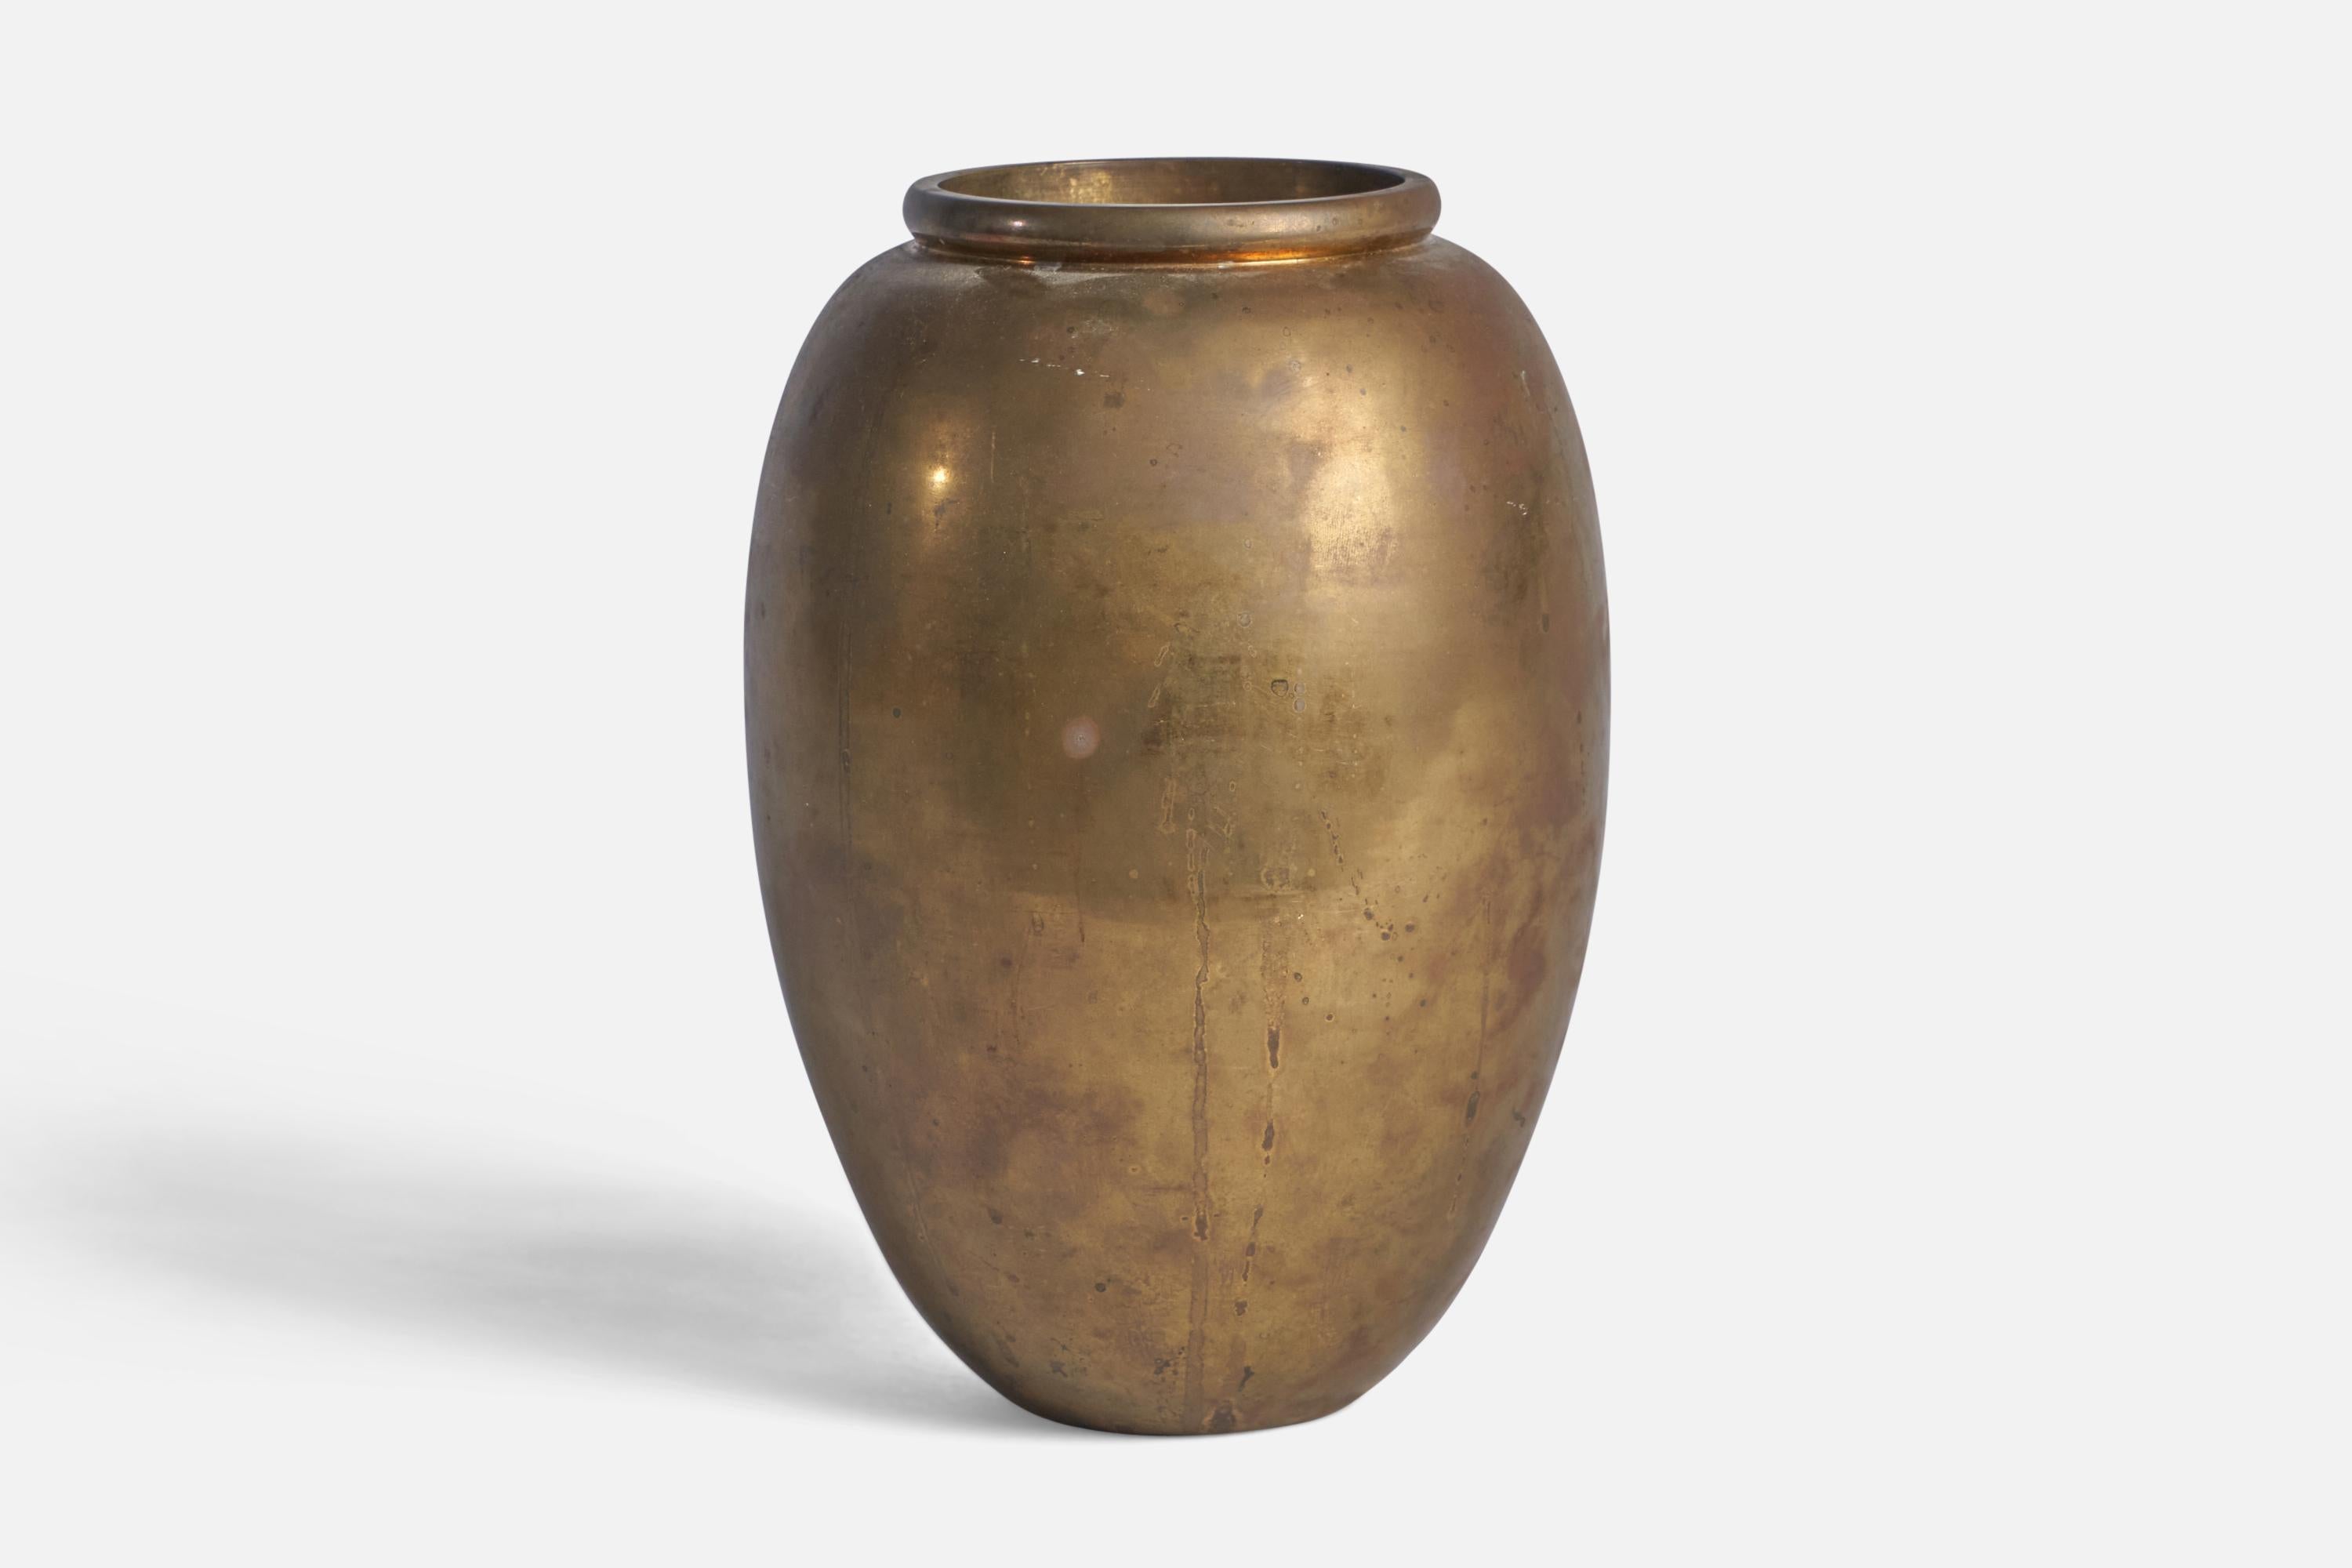 A sizeable brass vase designed and produced in Italy, 1940s.